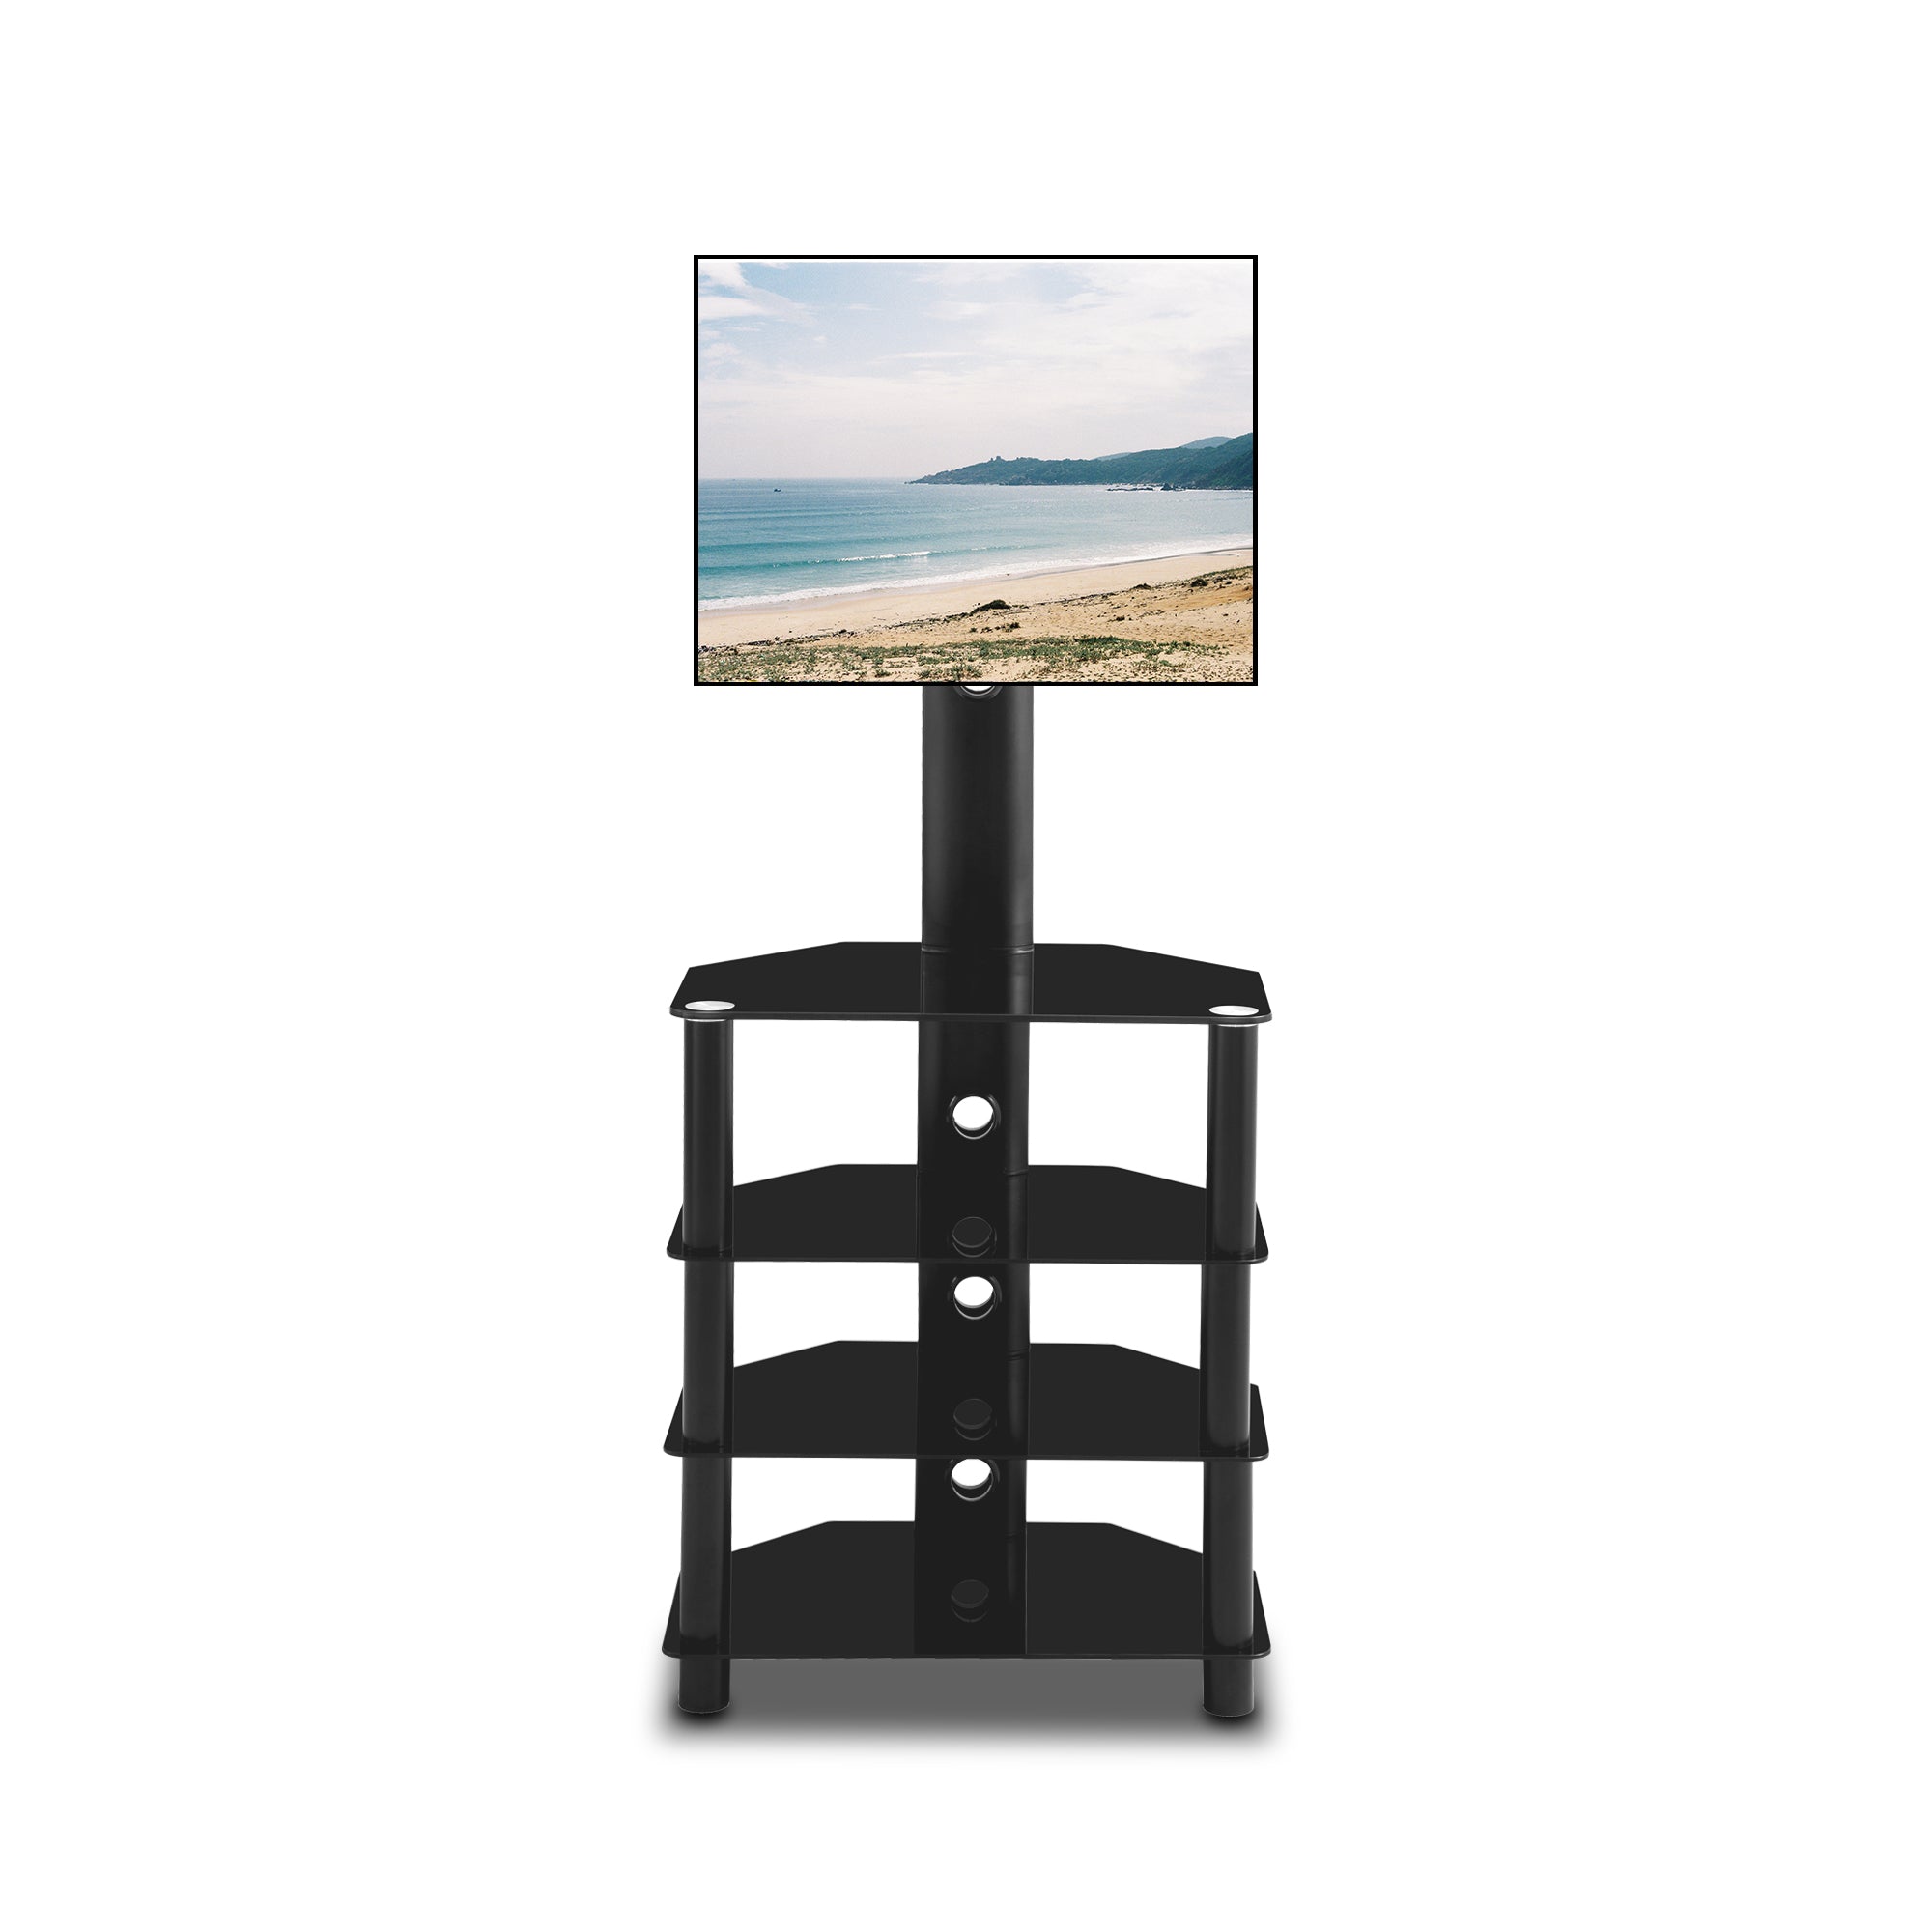 Black Multi-function Angle and height adjustable 4-Tier tempered glass metal frame Floor TV stand-Boyel Living